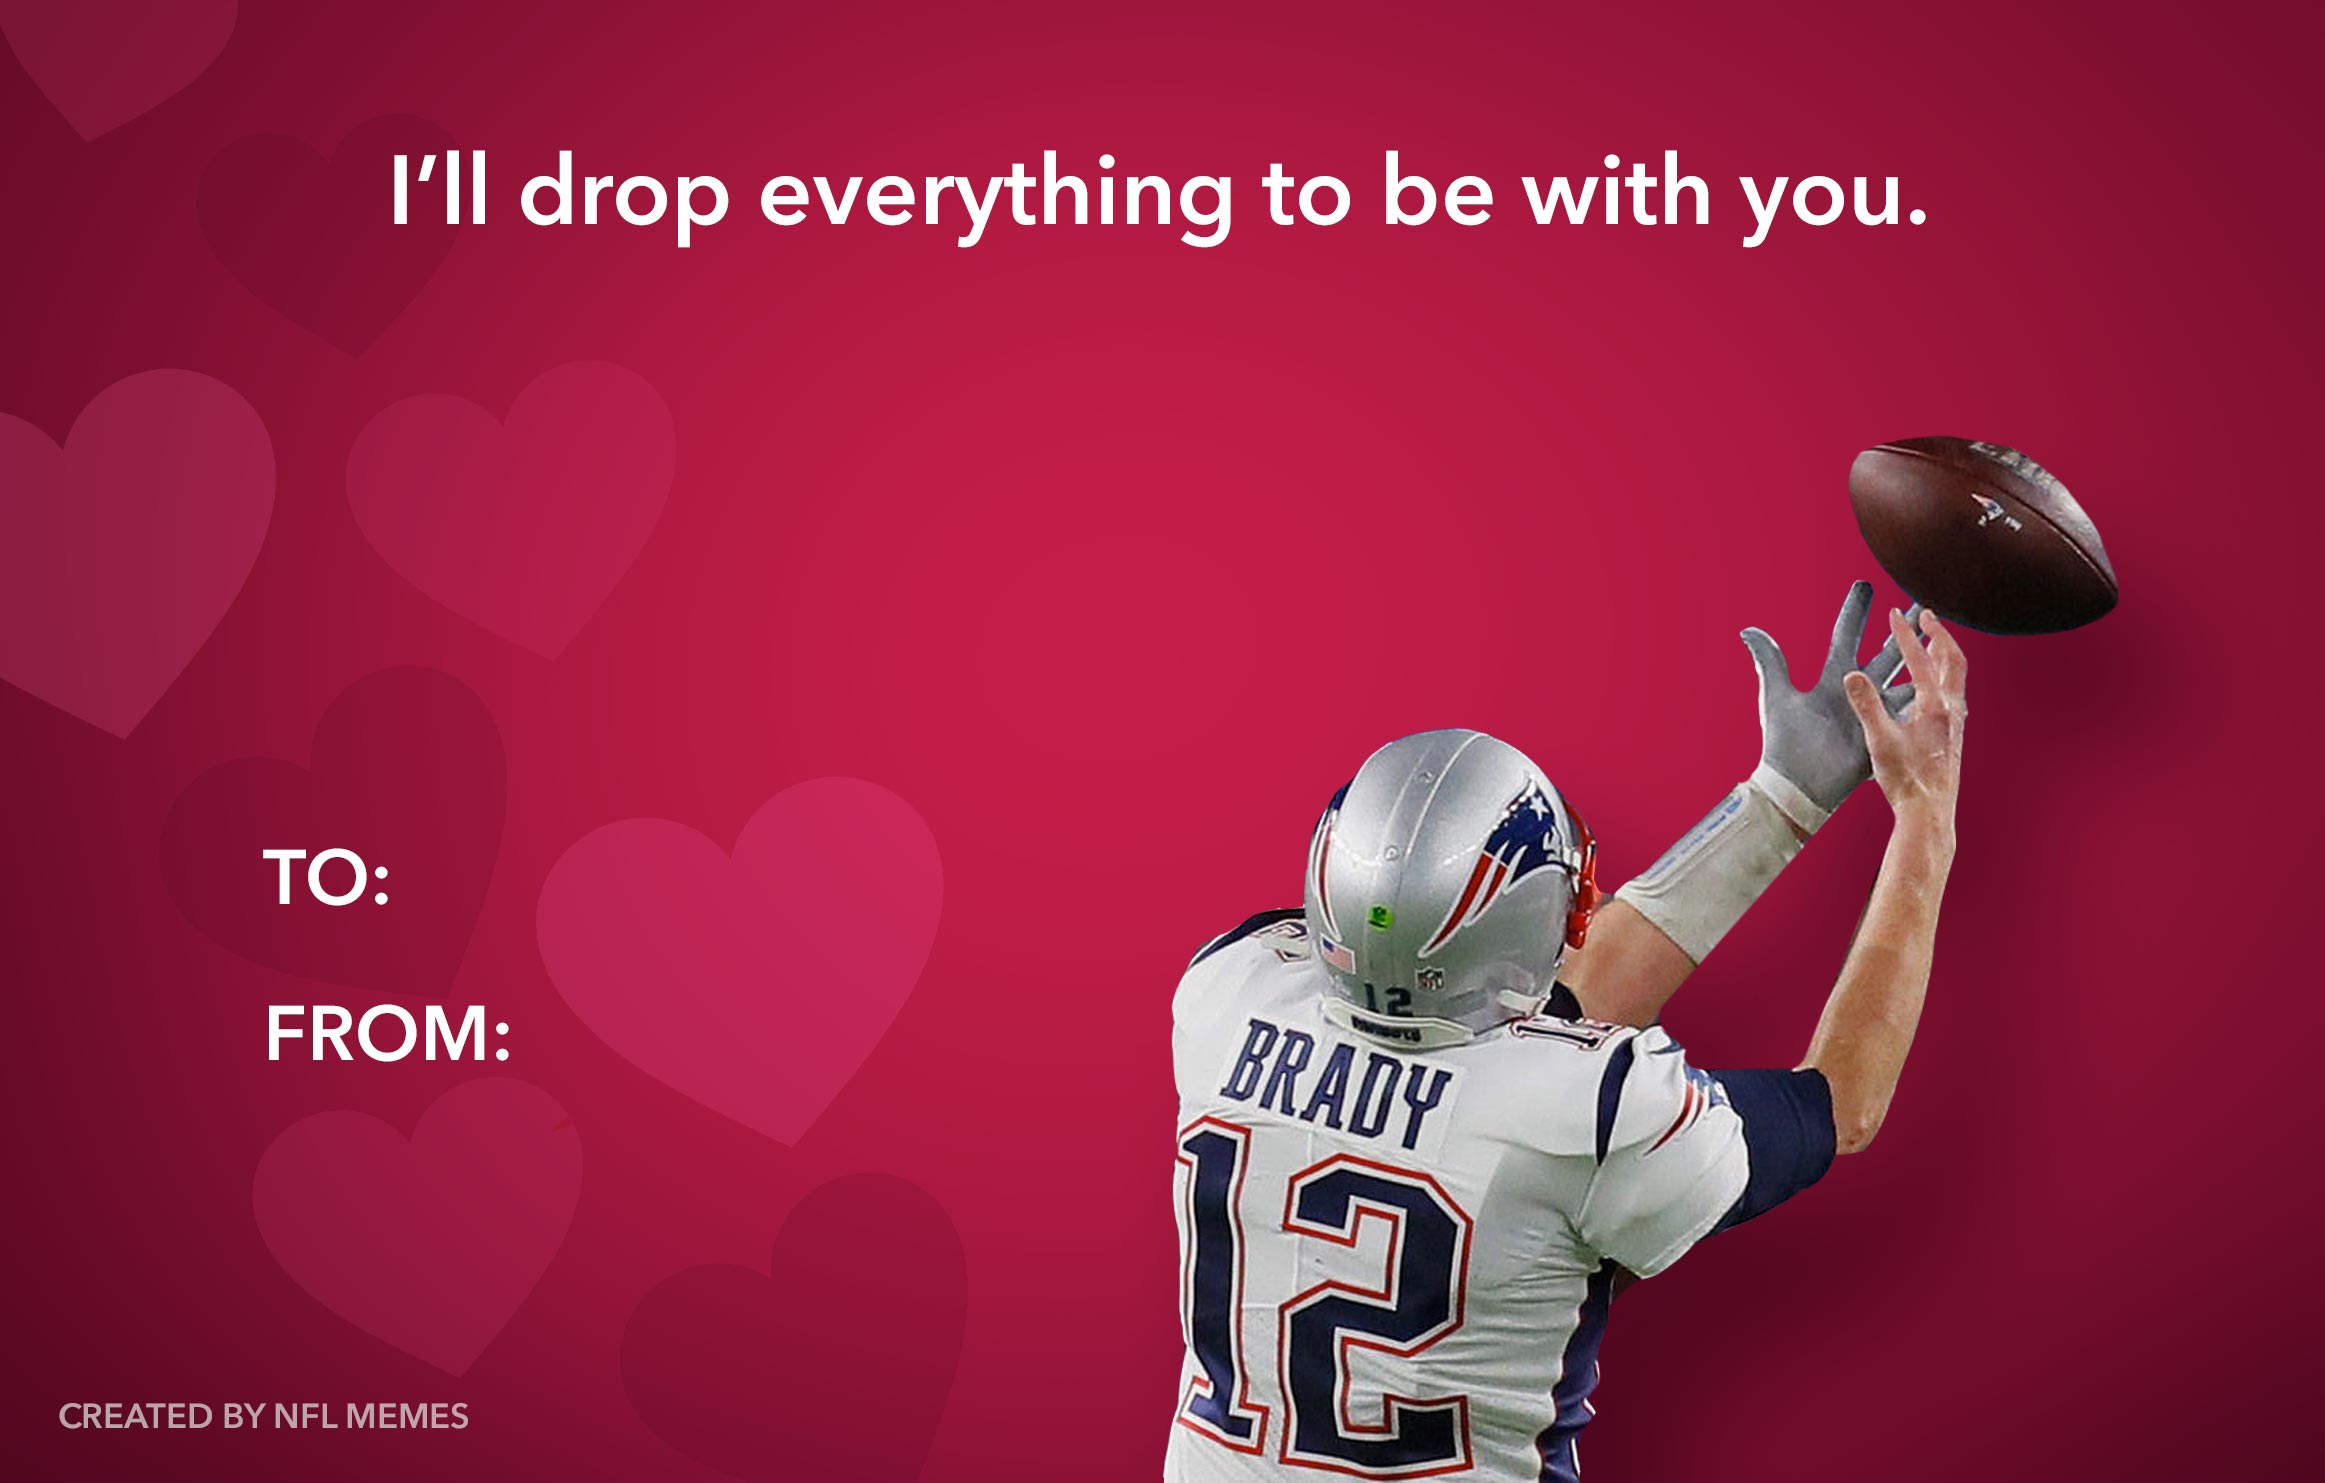 Here’s This Year’s Batch Of Hilarious NFLThemed Valentine’s Day Cards